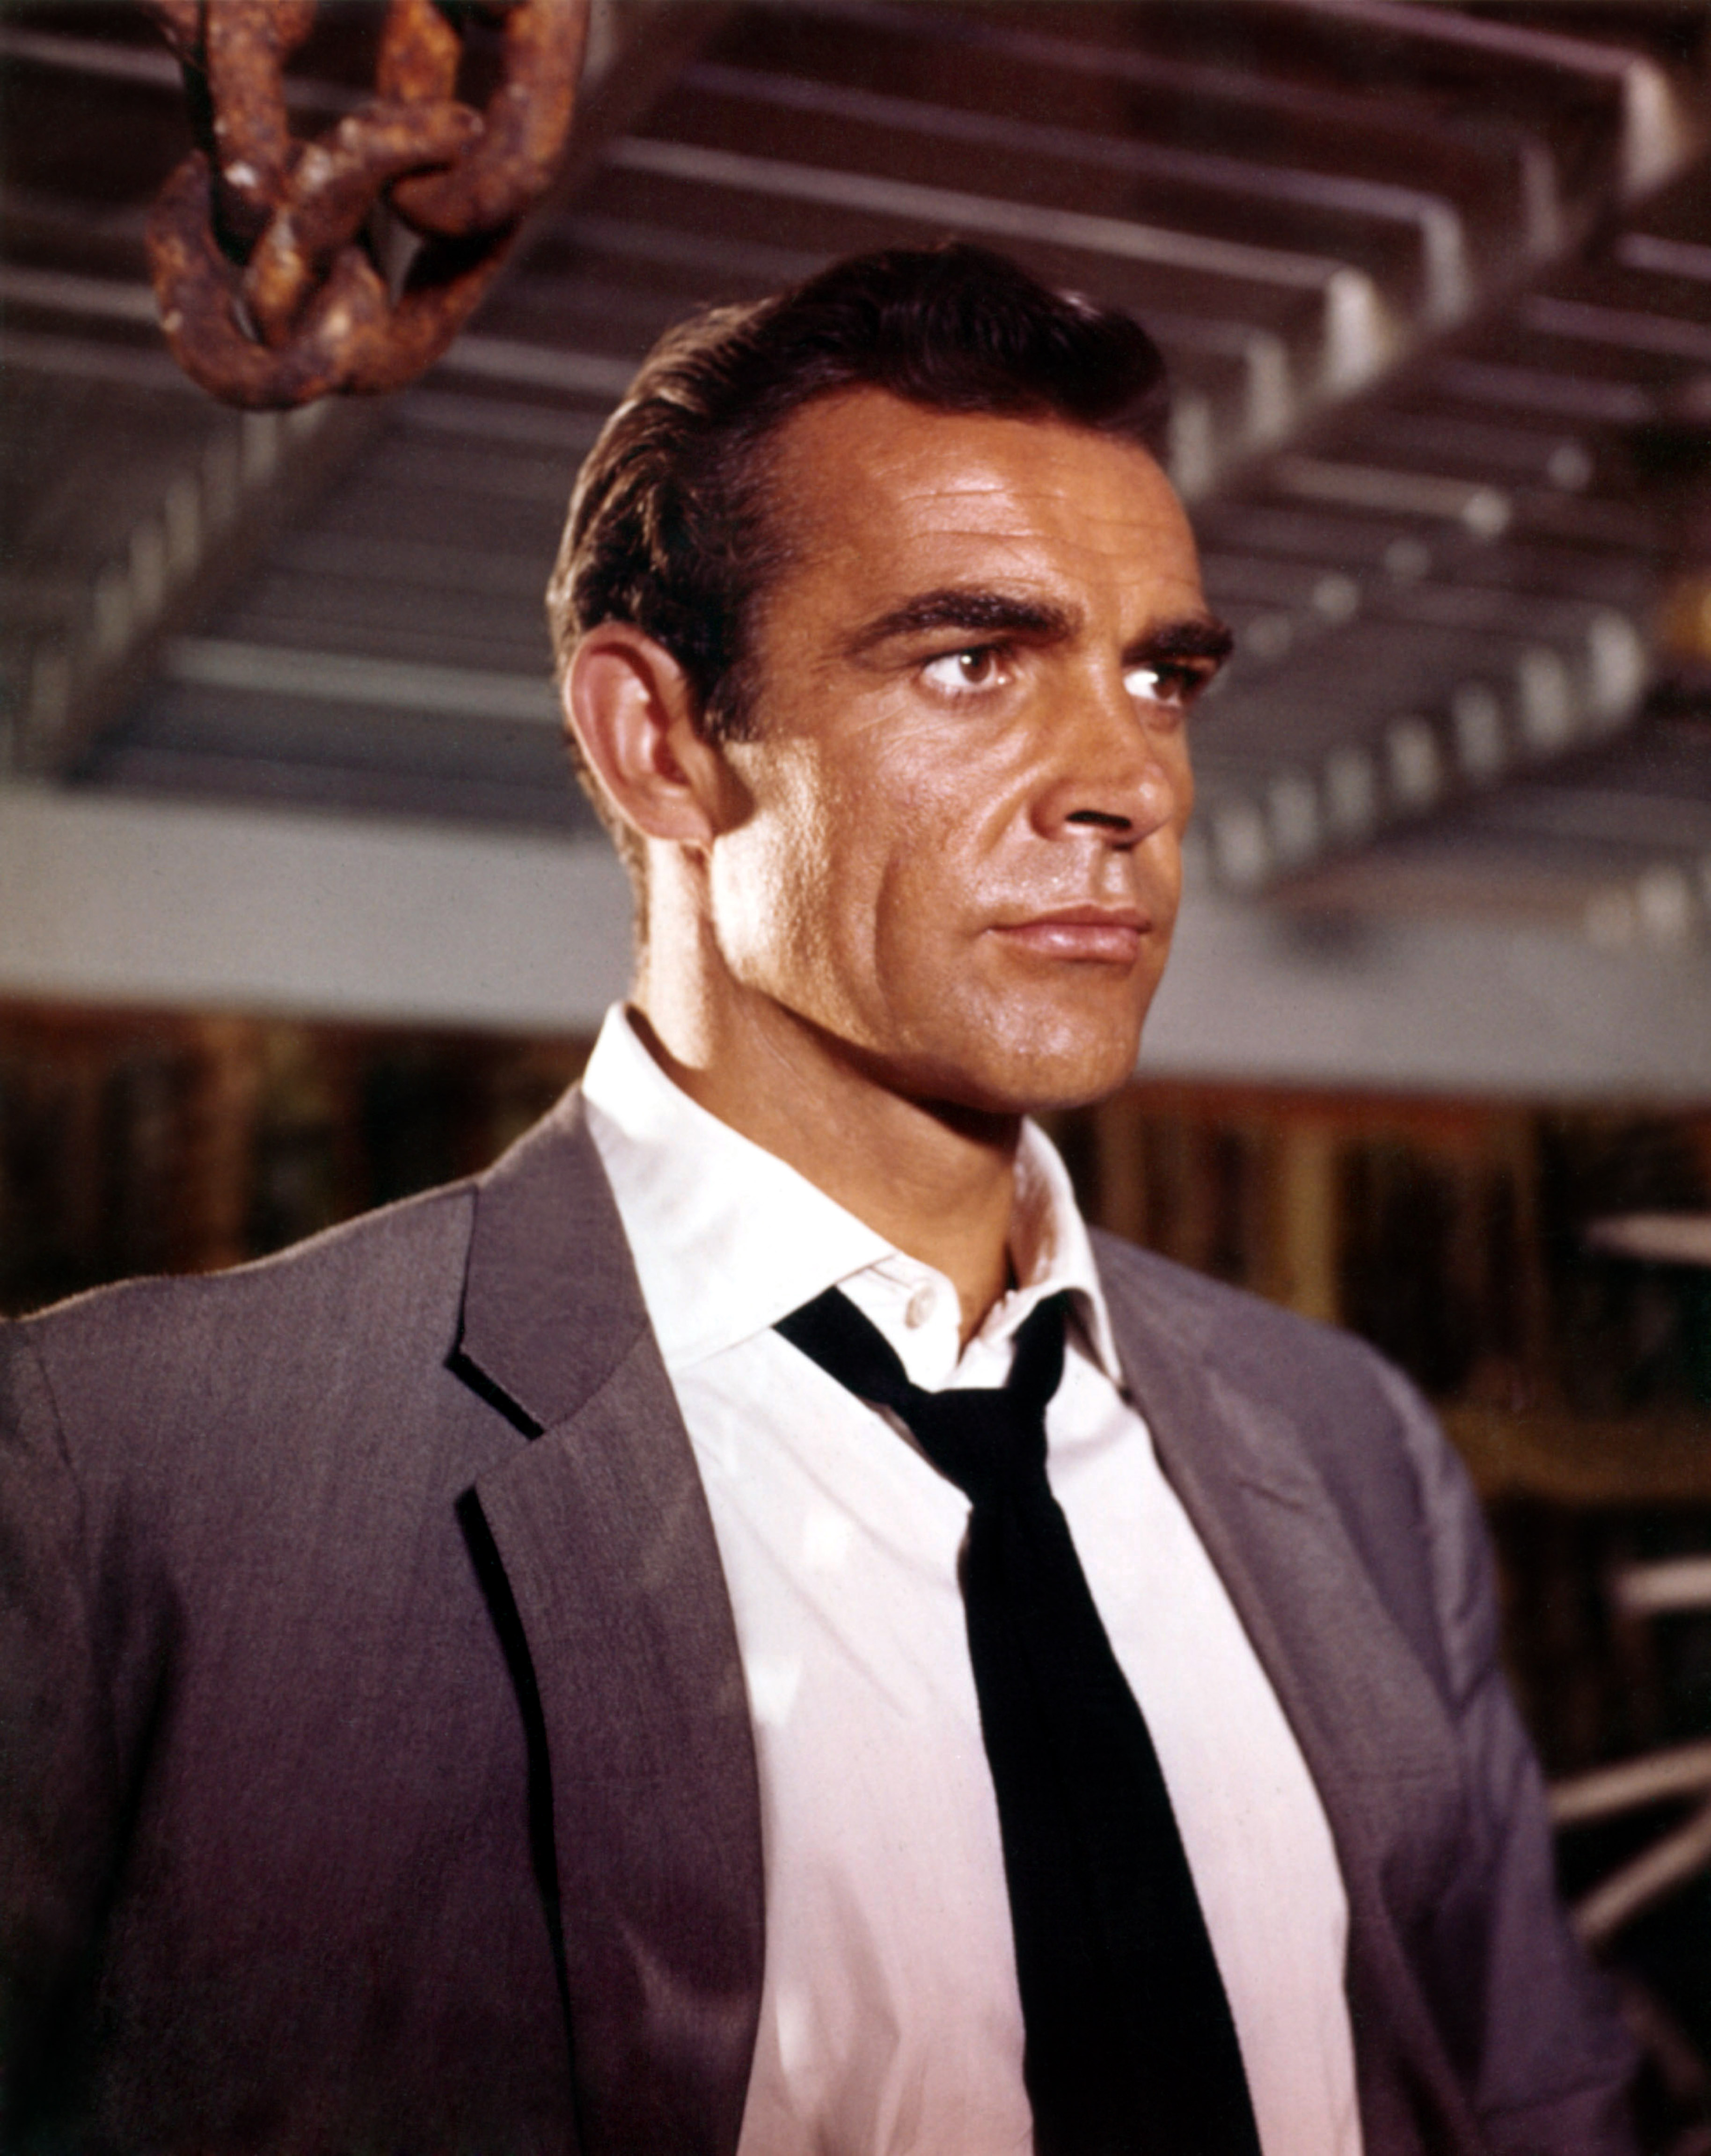 James Bond Book 'Nobody Does It Better': Sean Connery in 'Dr. No'